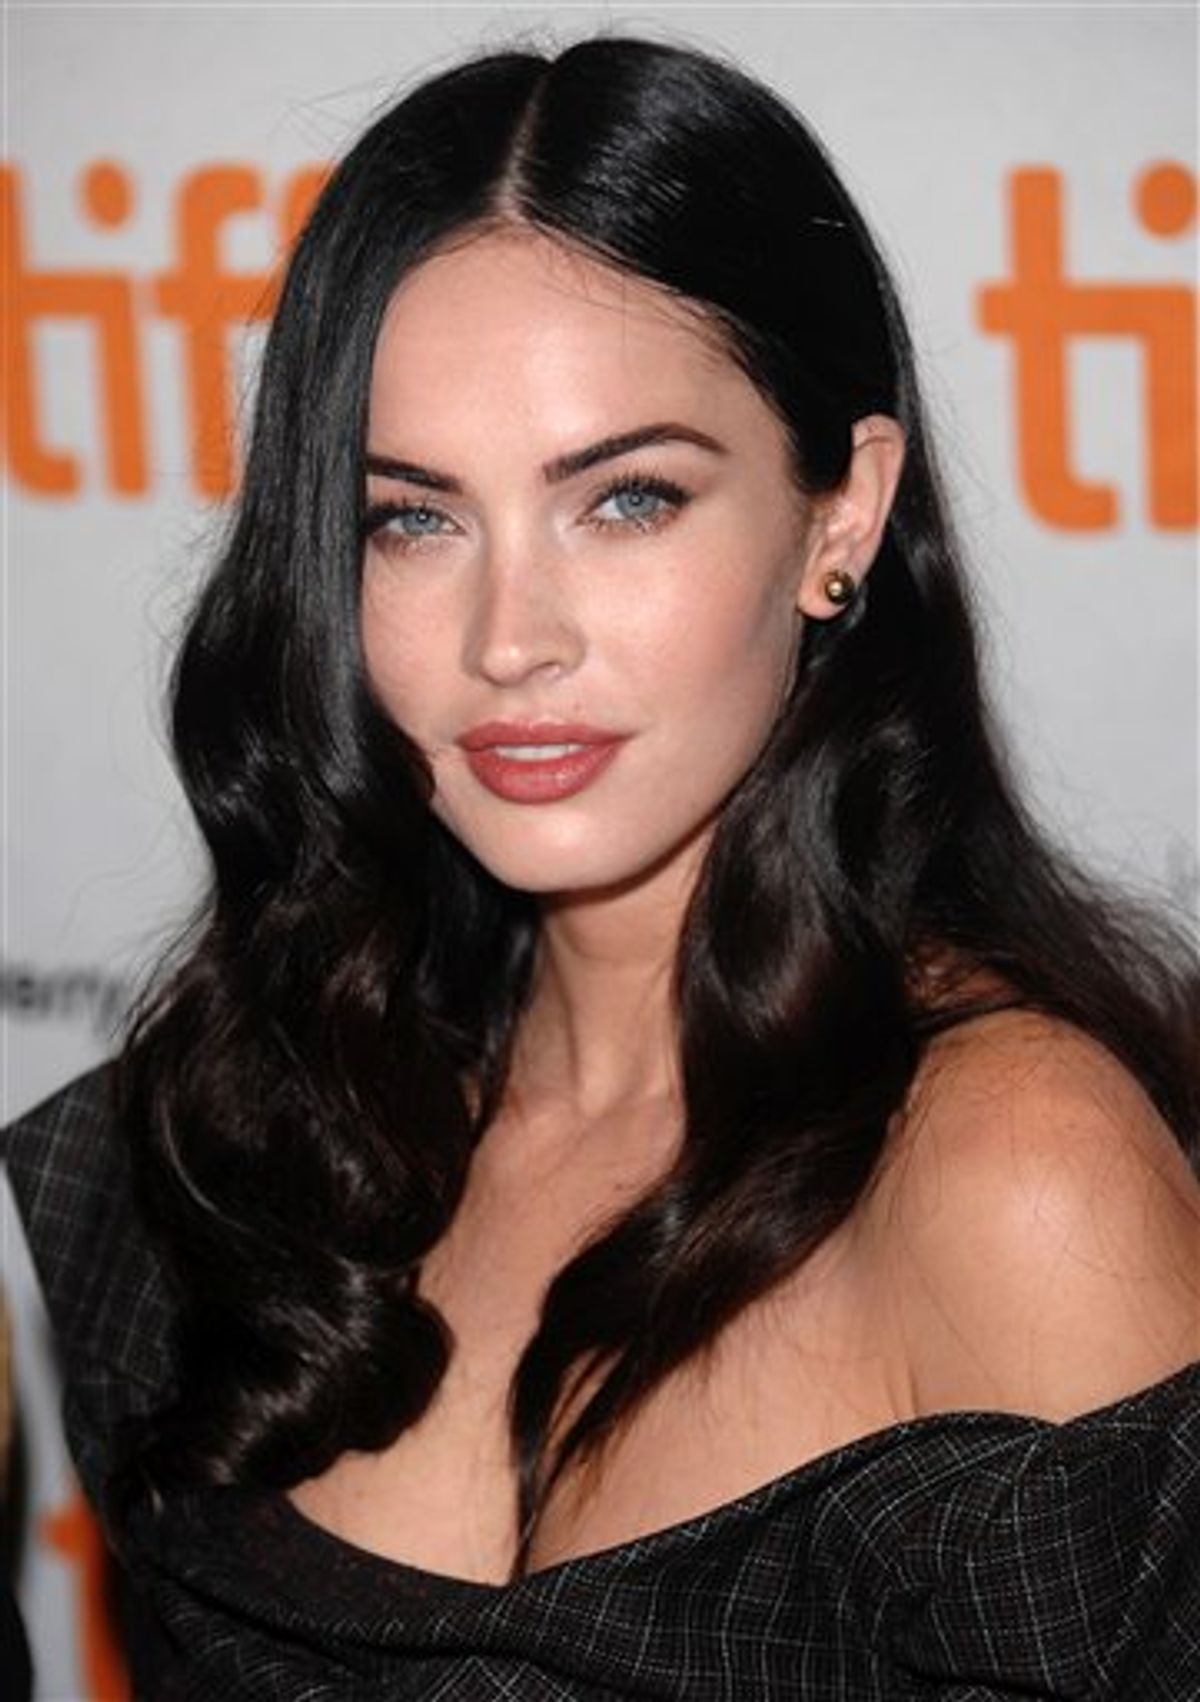 FILE - In this Sept. 11, 2009 file photo, actress Megan Fox participates in a press conference for the film "Jennifer's Body" during the Toronto International Film Festival in Toronto. (AP Photo/Evan Agostini, file) (AP)